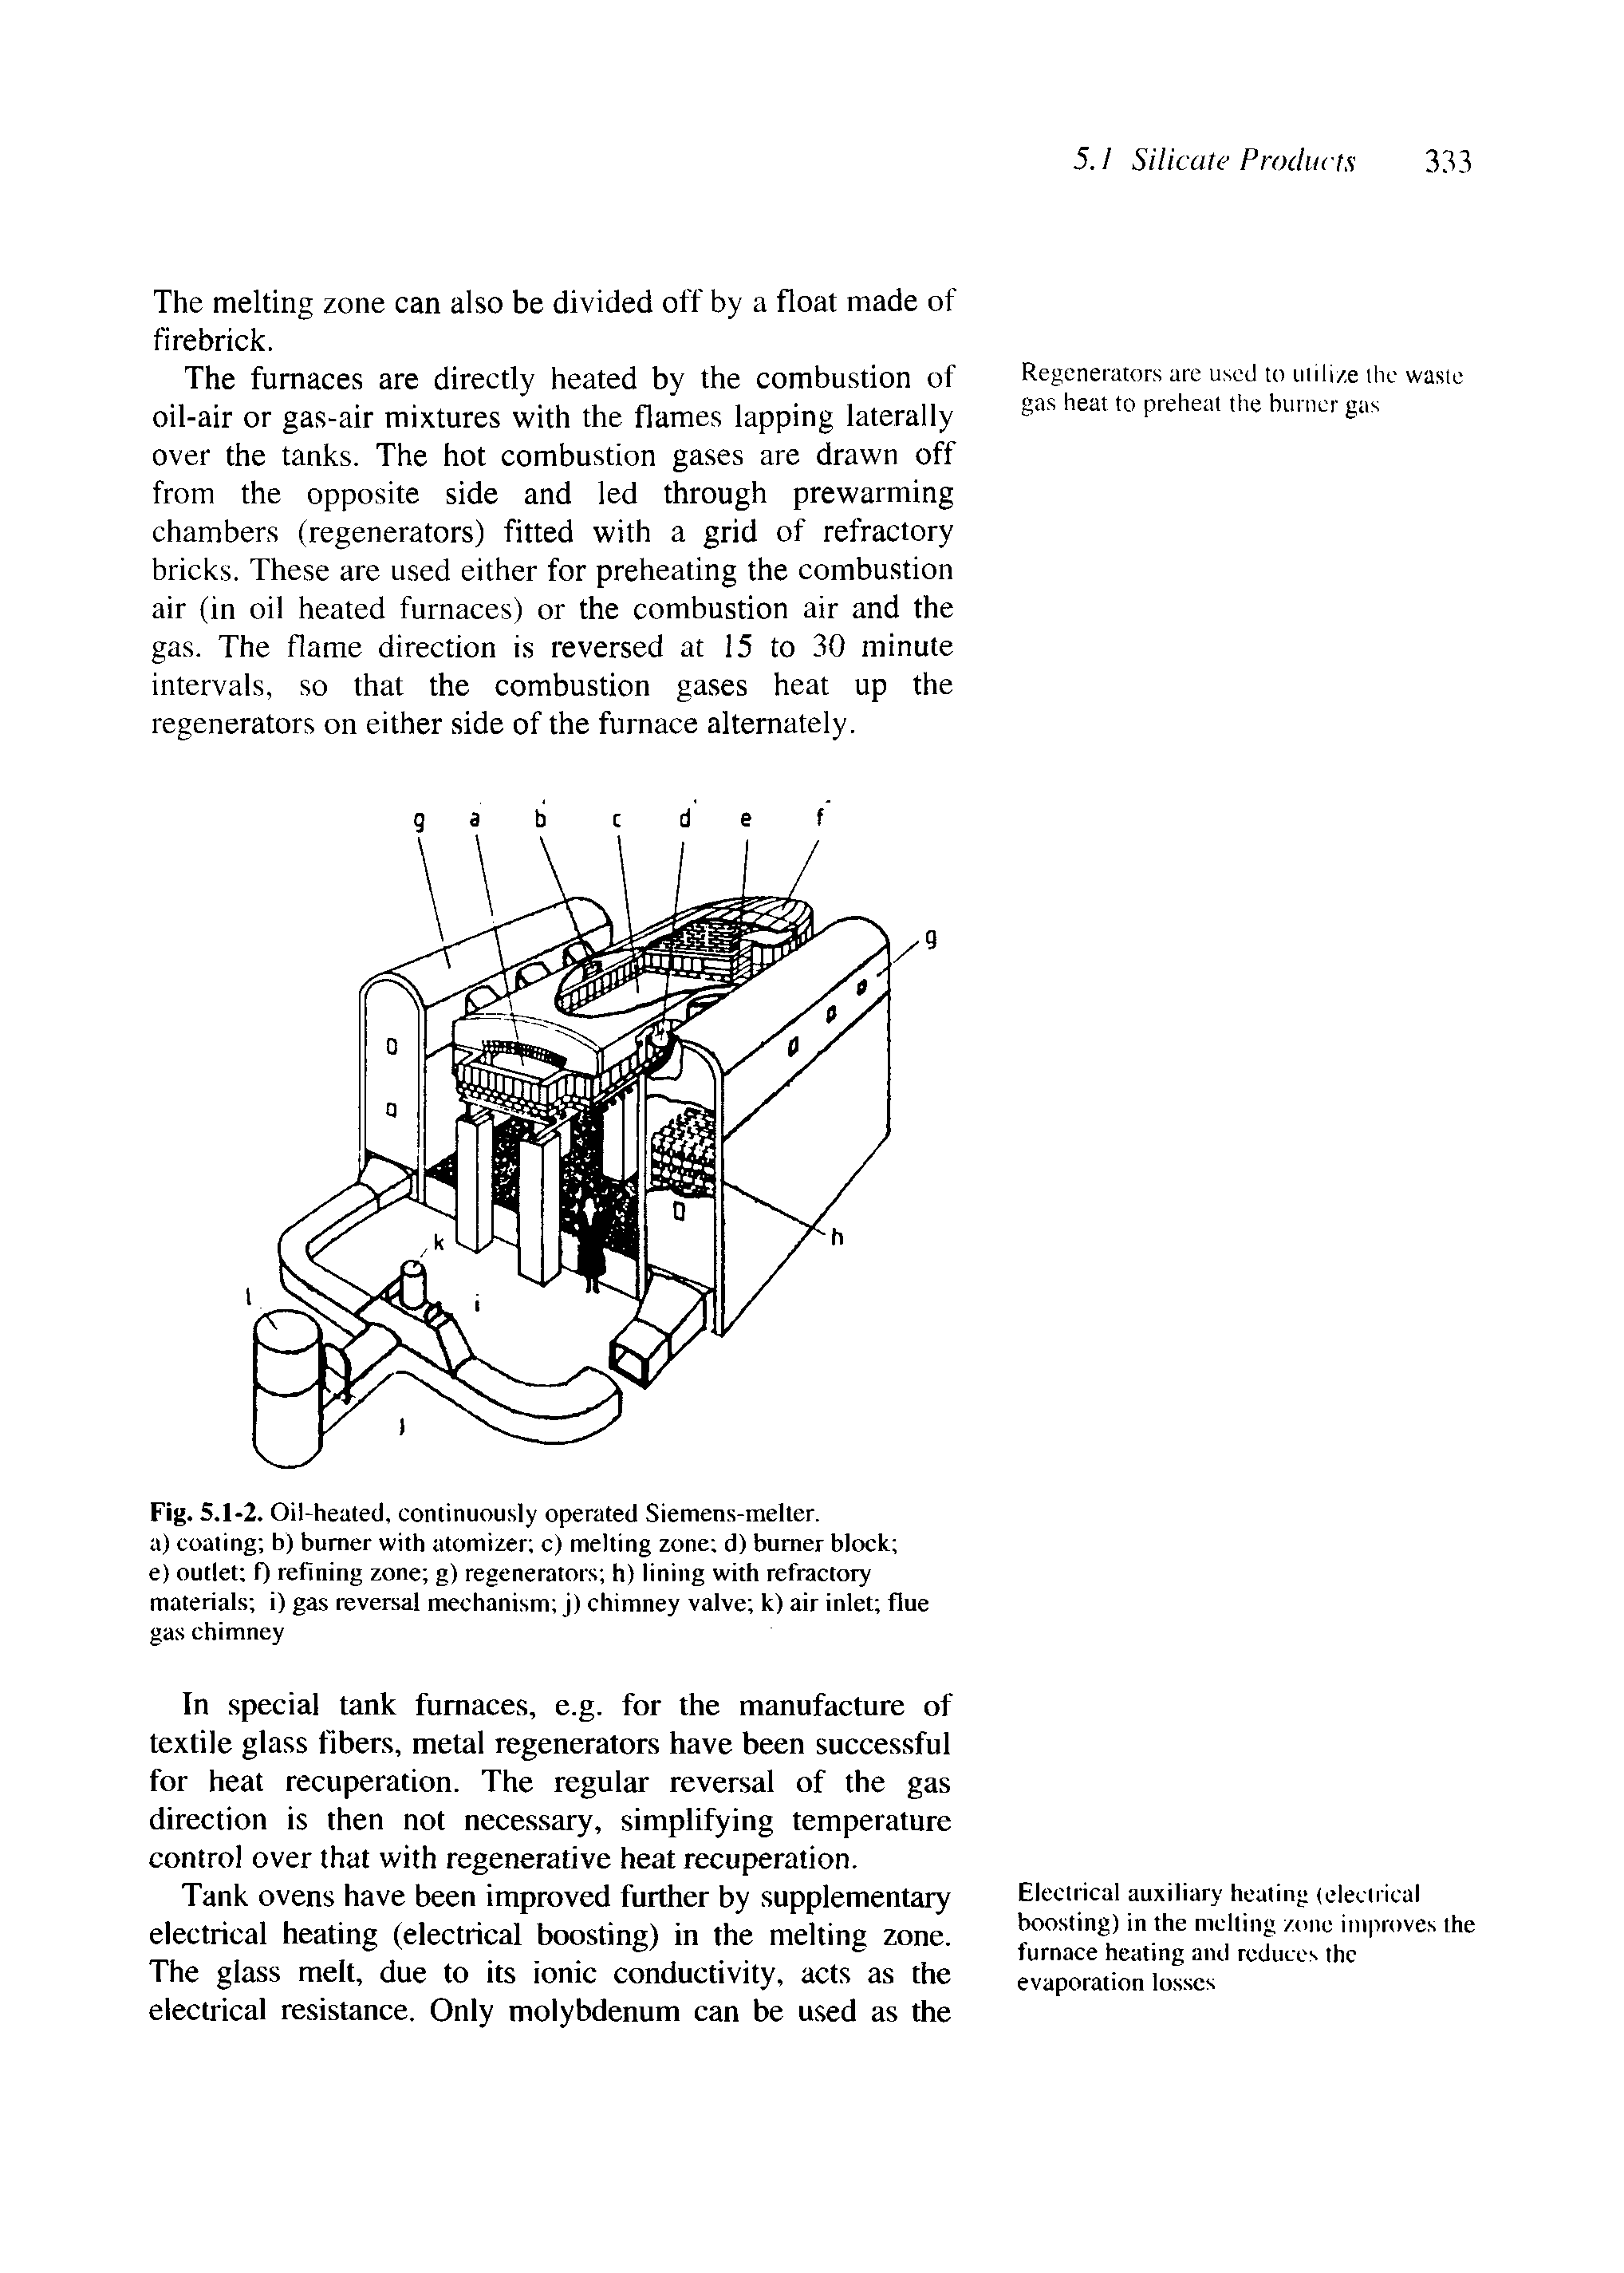 Fig. 5.1-2. Oil-heated, continuously operated Siemens-melter. a) coaling b) burner with atomizer c) melting zone d) burner block e) outlet f) refining zone g) regenerators h) lining with refractory materials i) gas reversal mechanism j) chimney valve k) air inlet flue gas chimney...